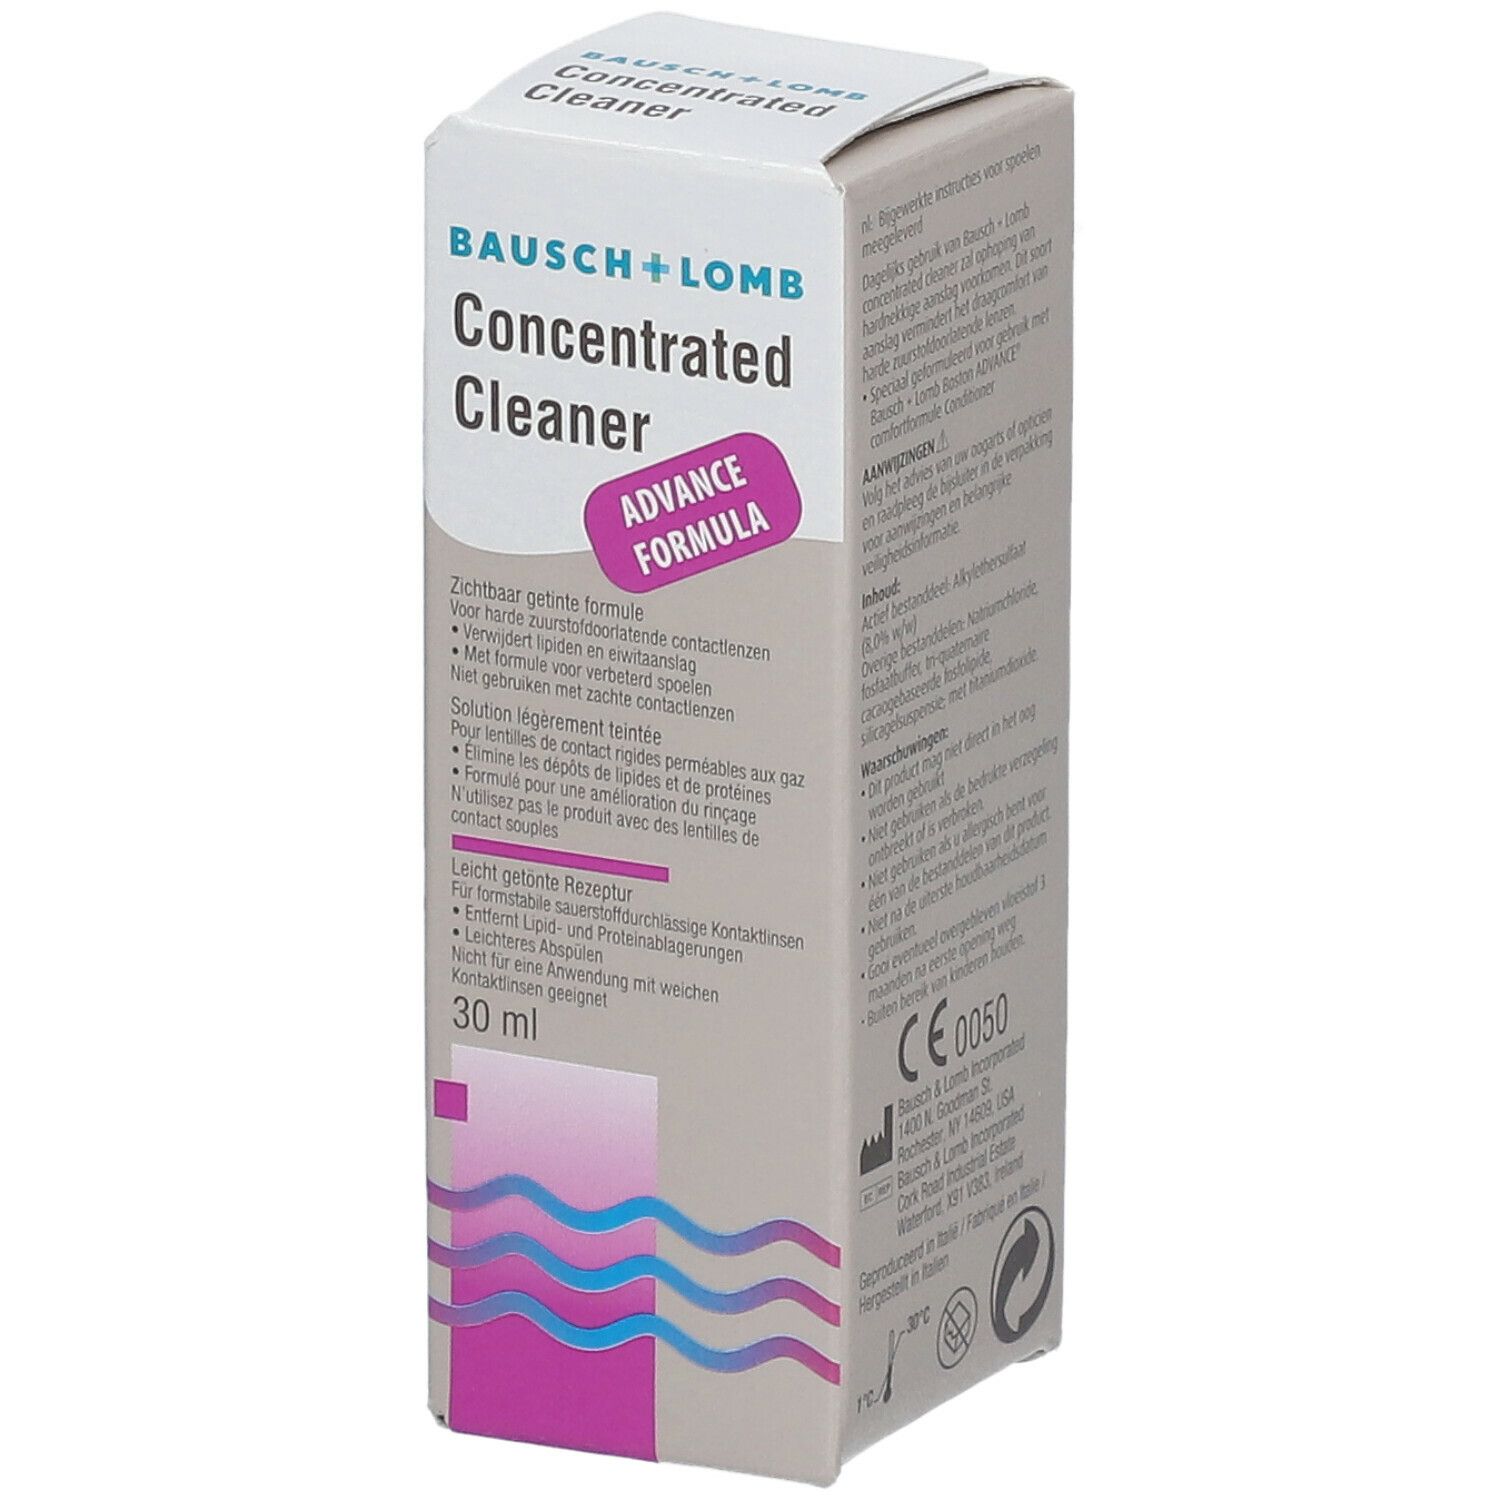 Bausch & Lomb Concentrated Cleanser Nouvelle Formule